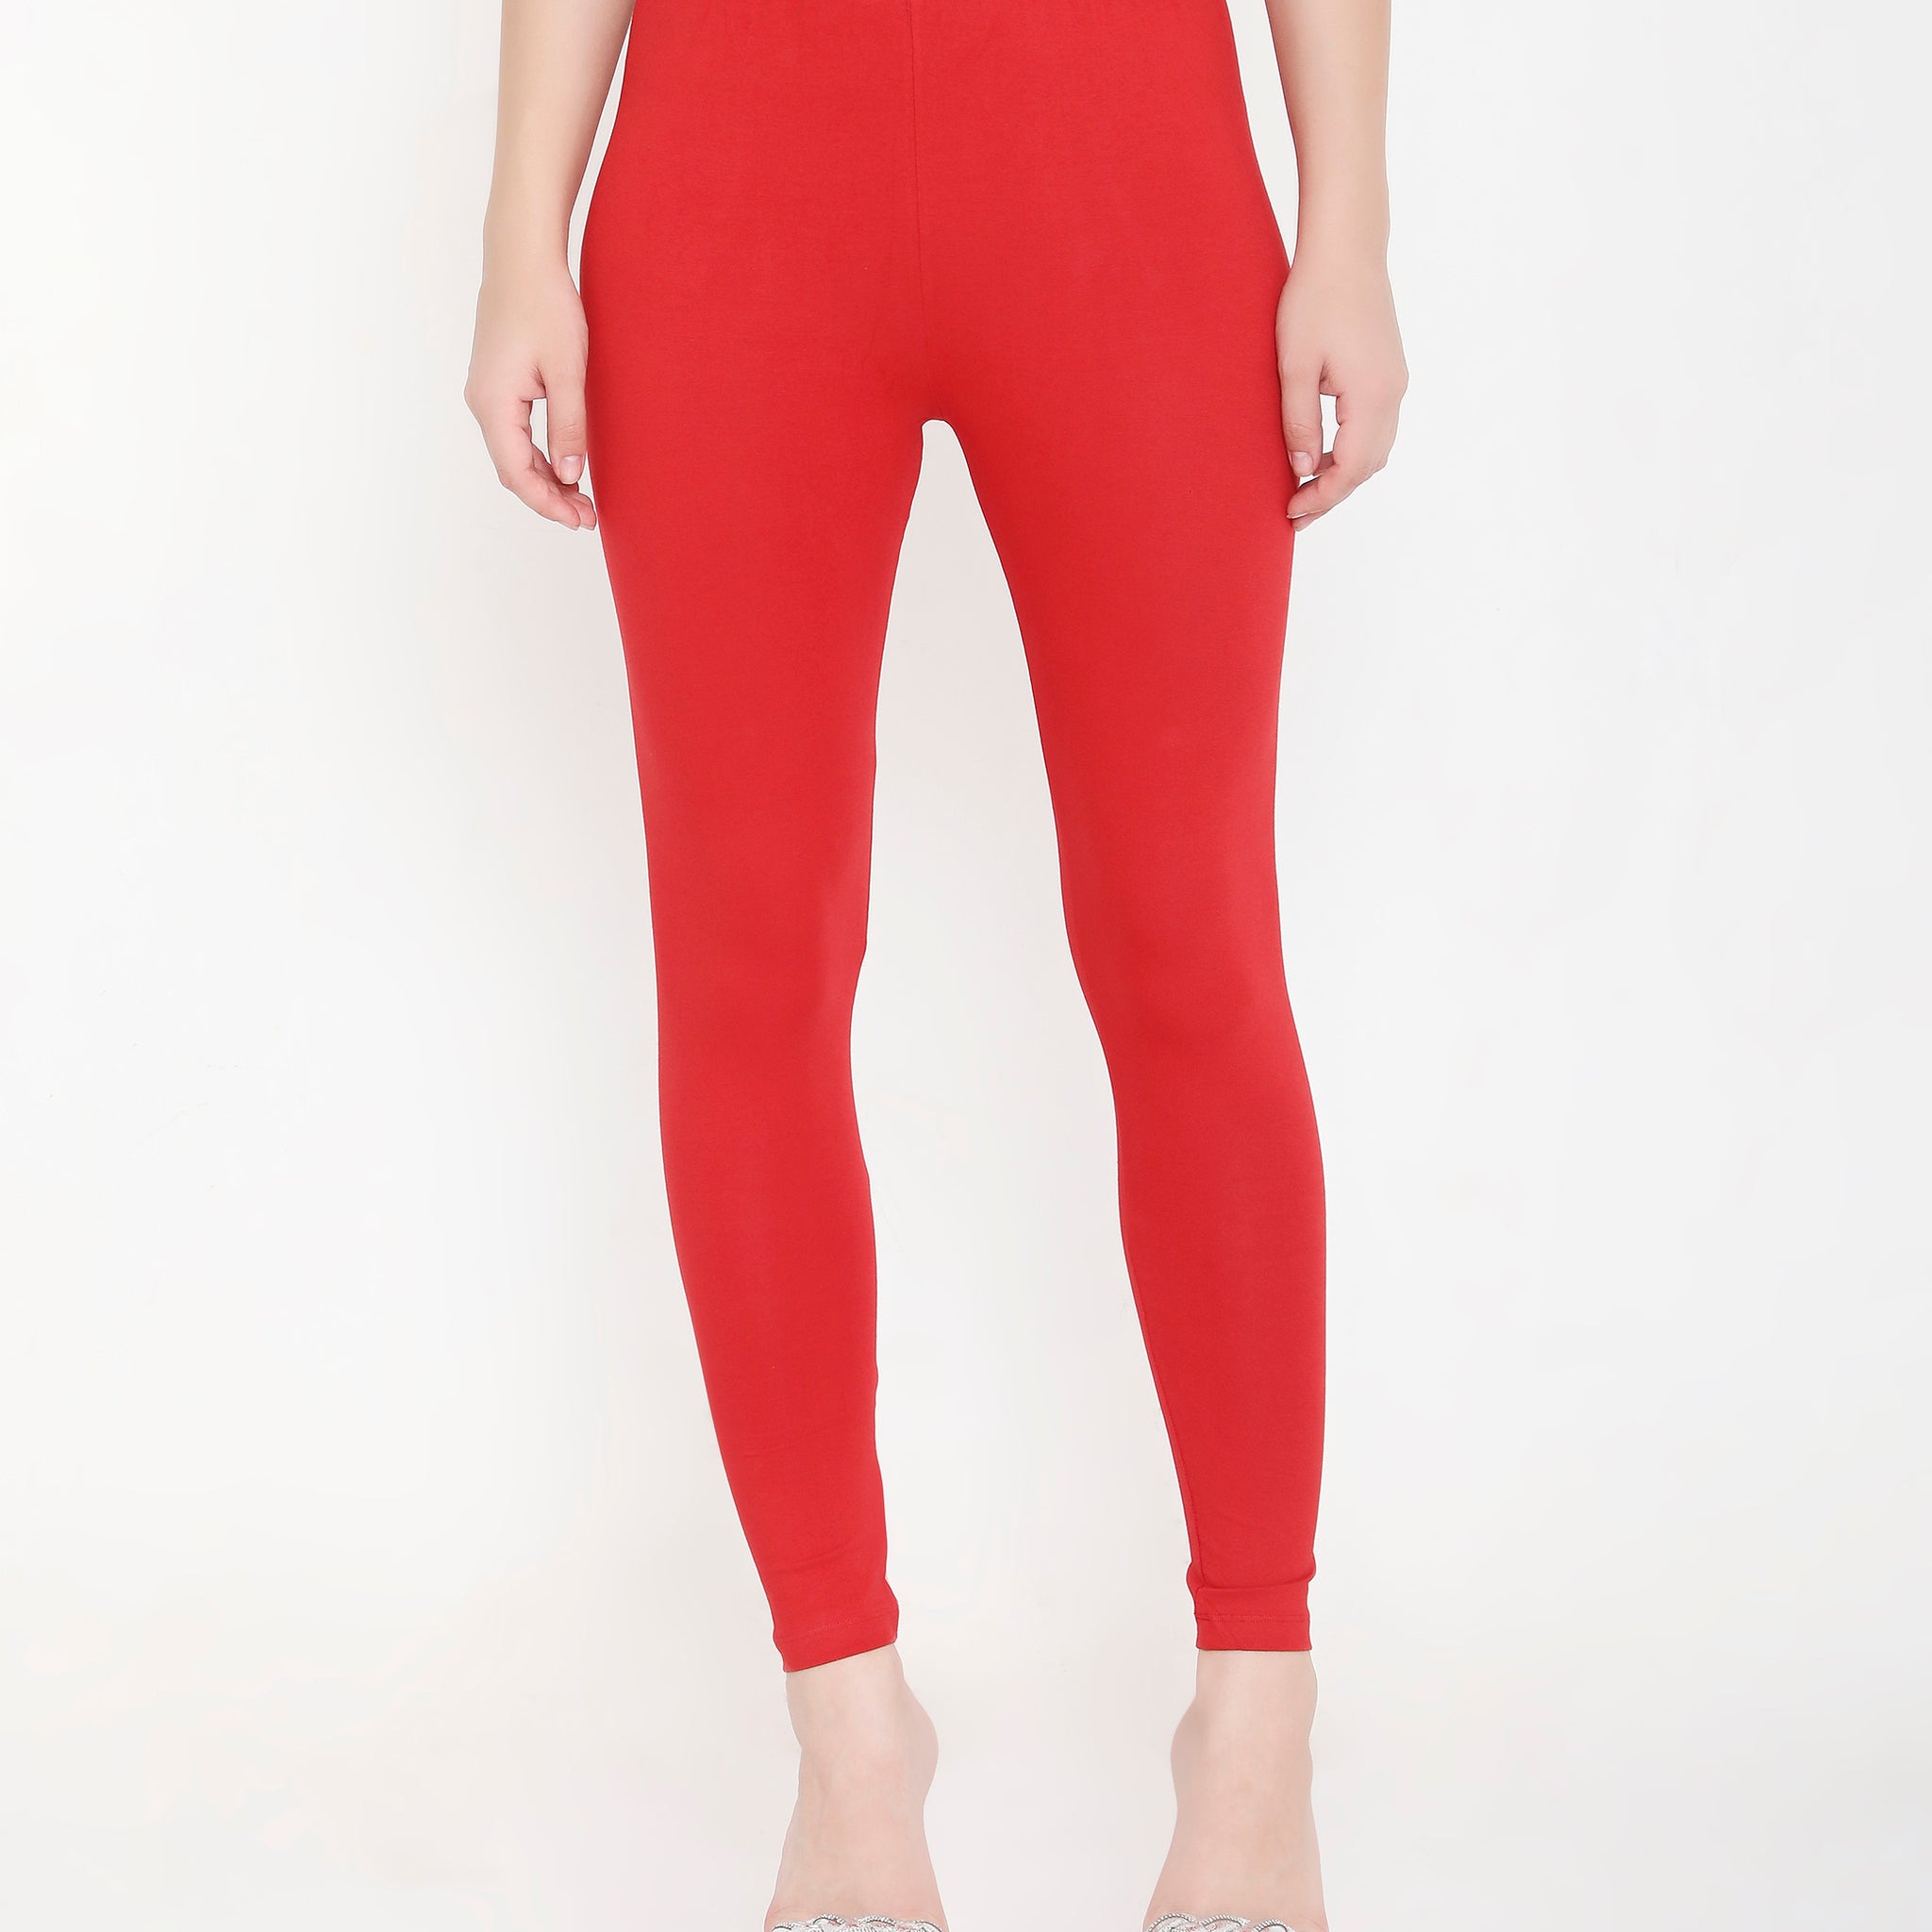 SOLID RED ANKLE-LENGTH COTTON LEGGINGS FOR WOMEN